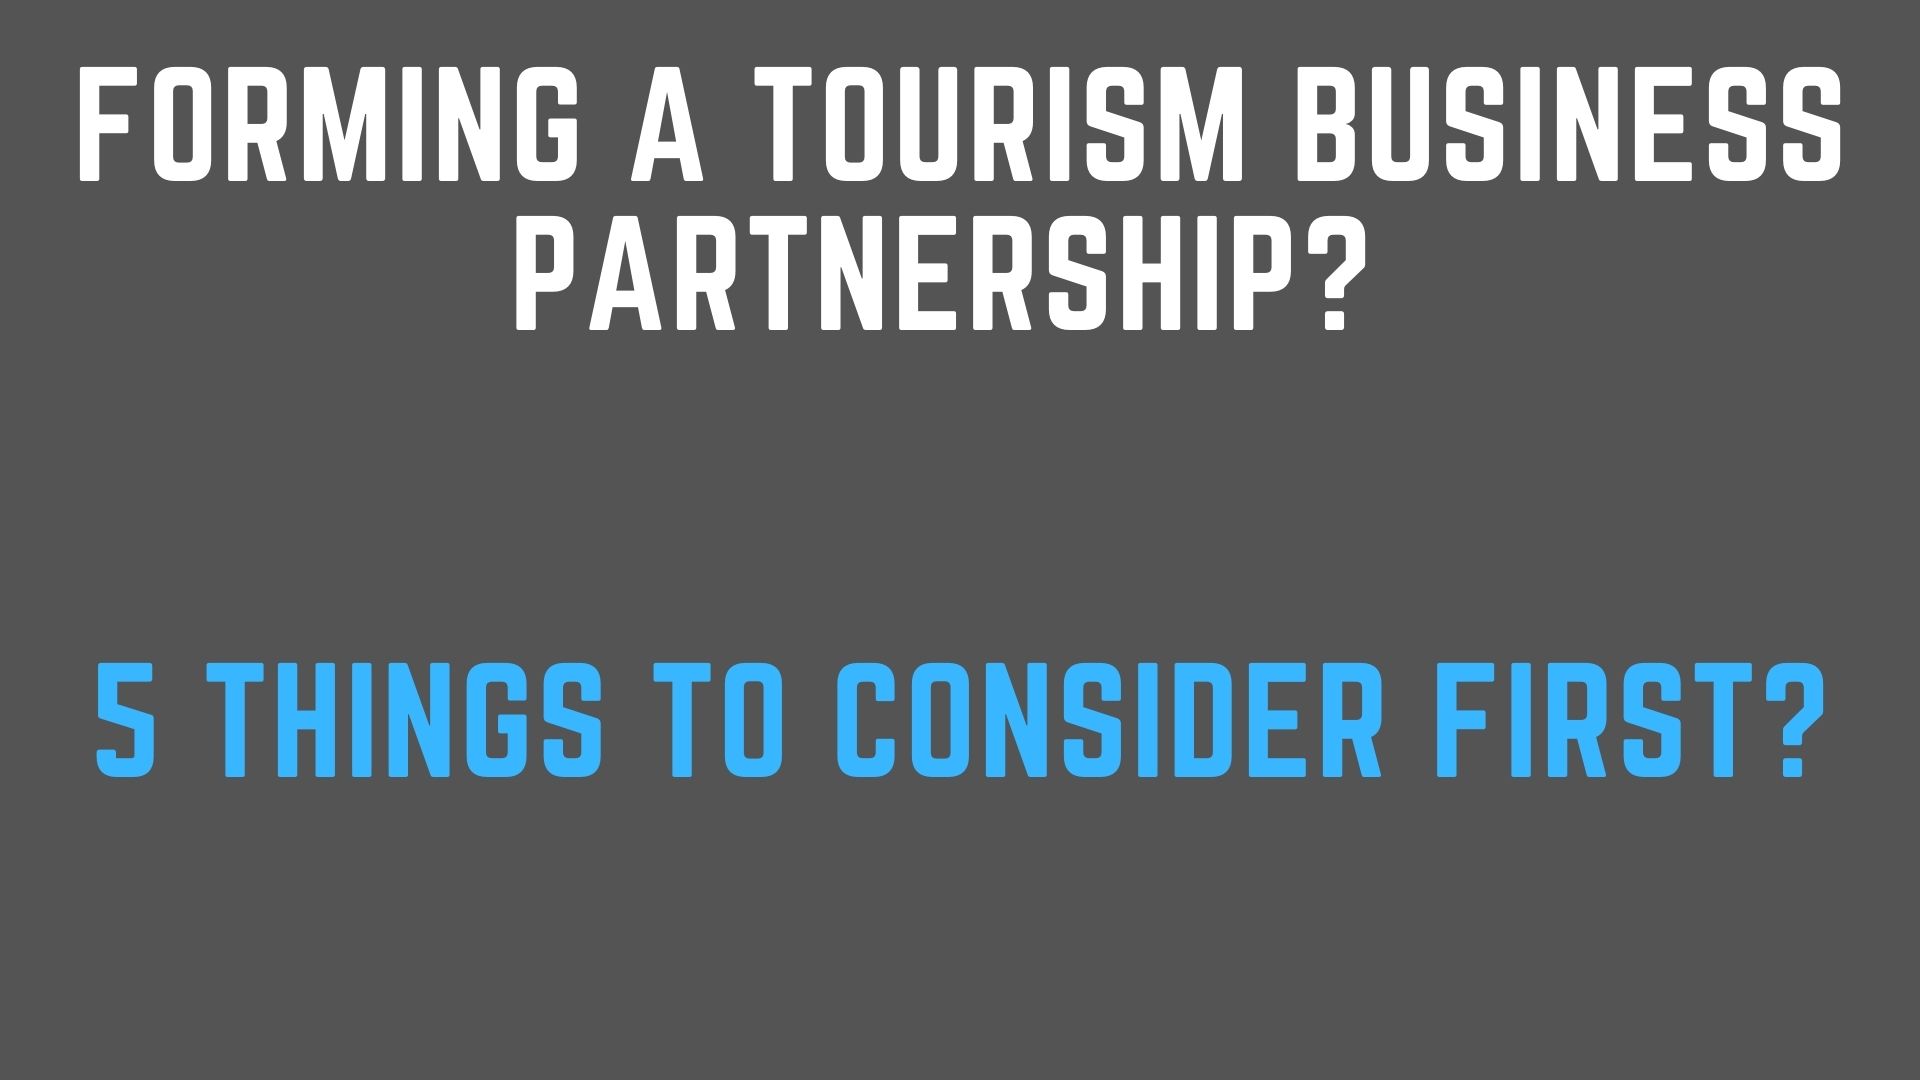 Things To Consider Before Forming A Partnership In The Tourism Business